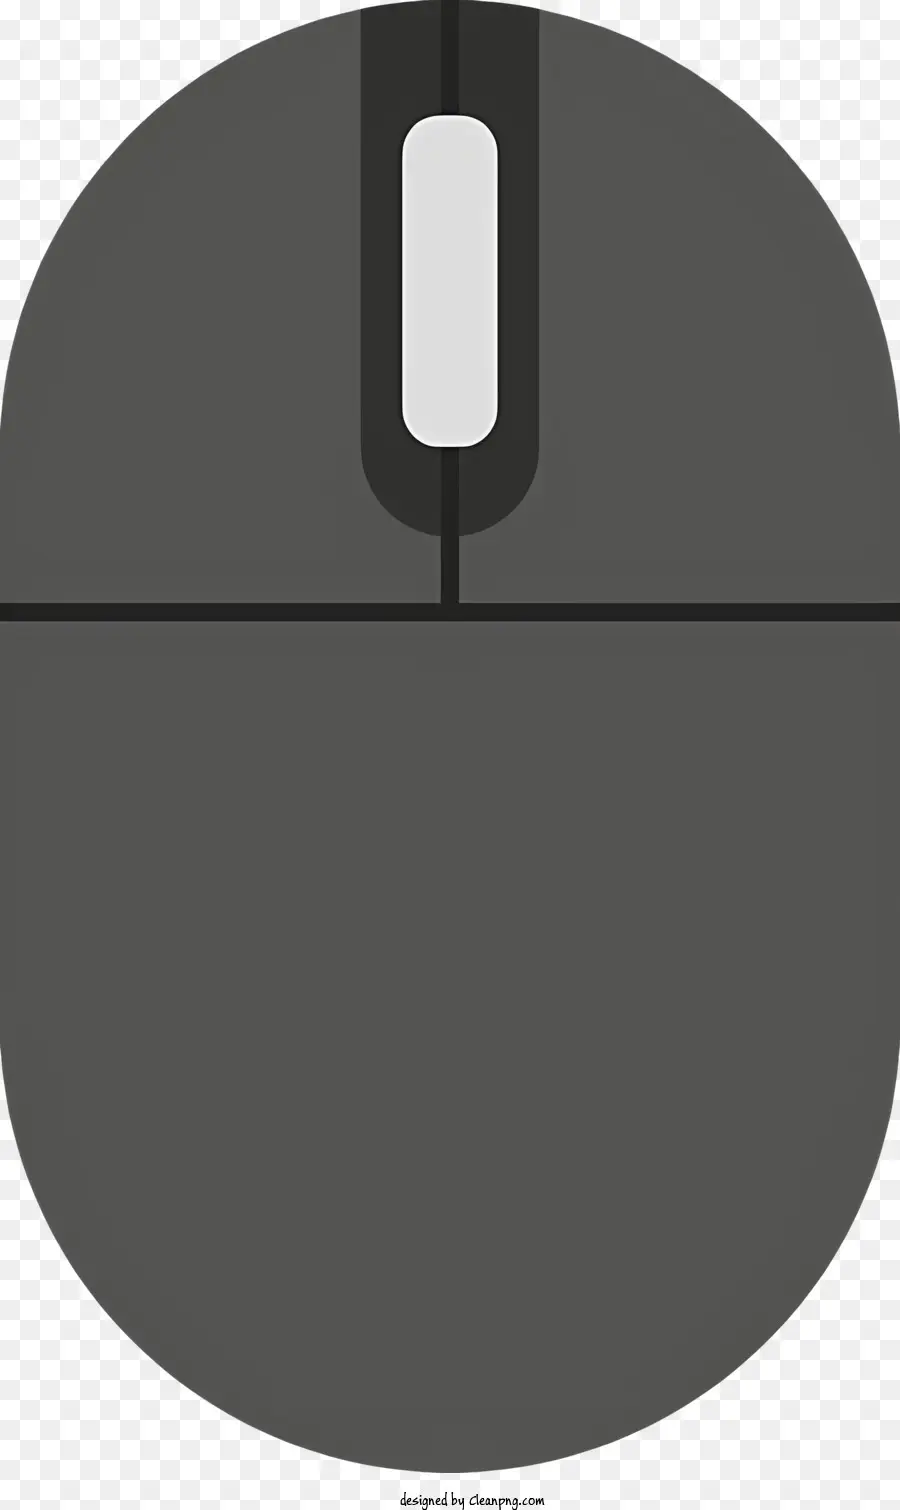 computer mouse black and white circular shape white light shiny surface